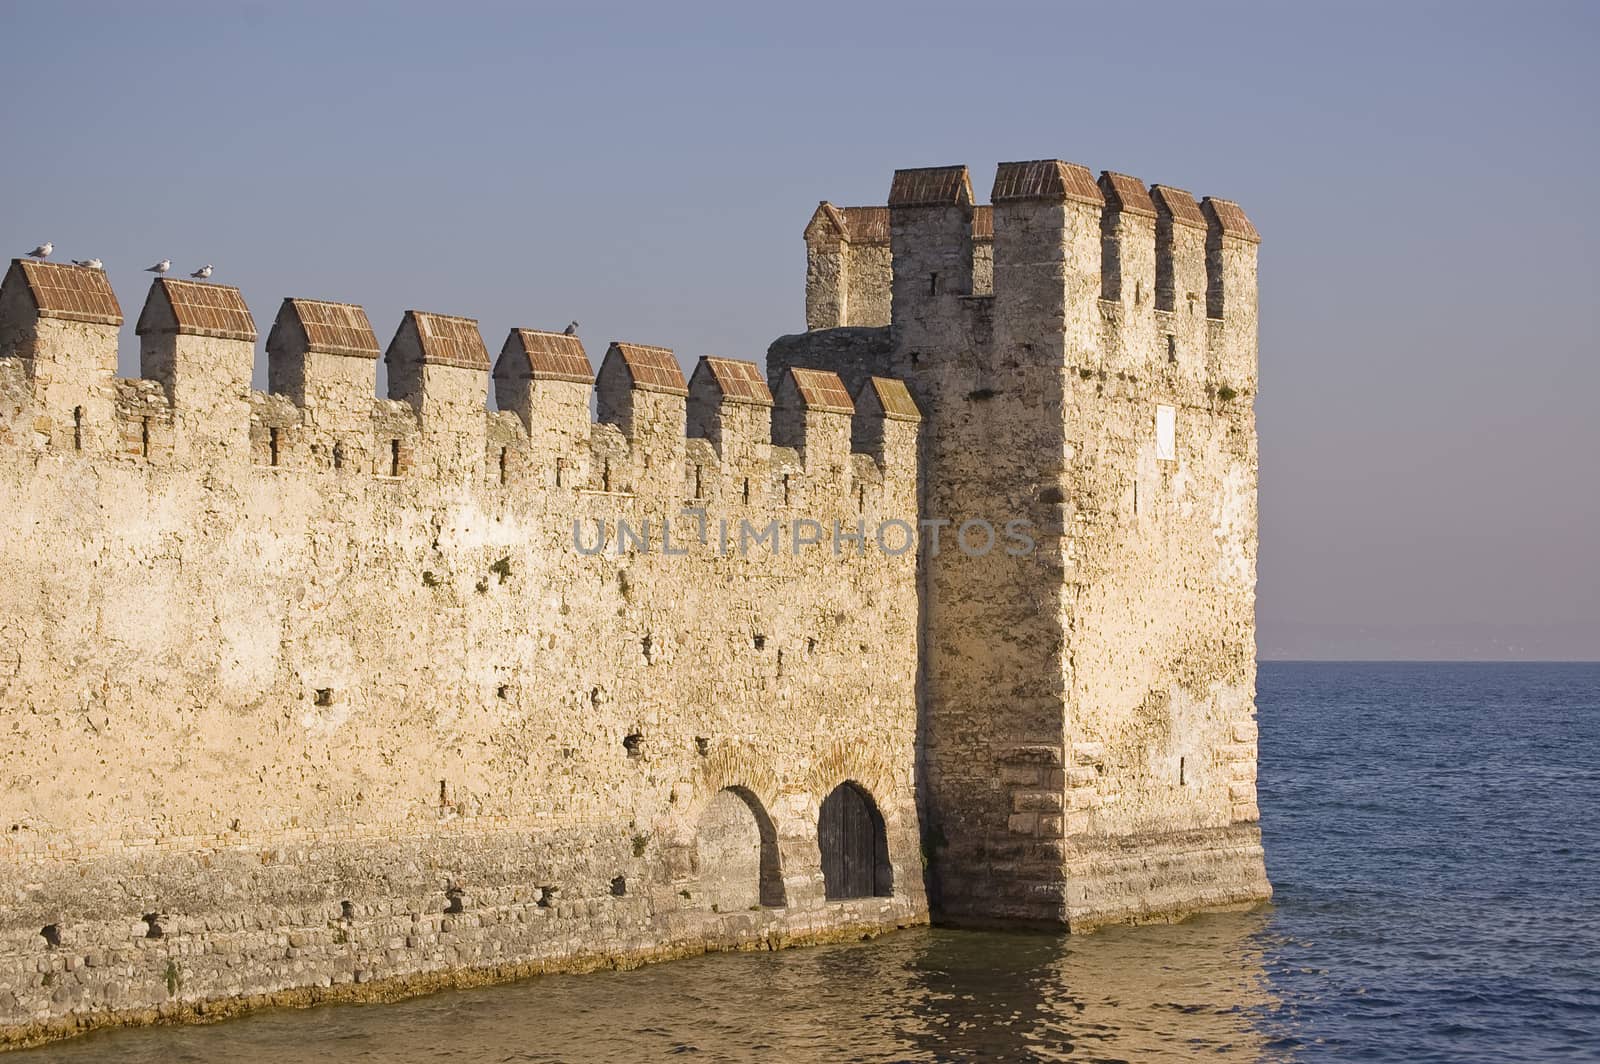 The old fortification located on the Garda's lake in Lazise, Italy